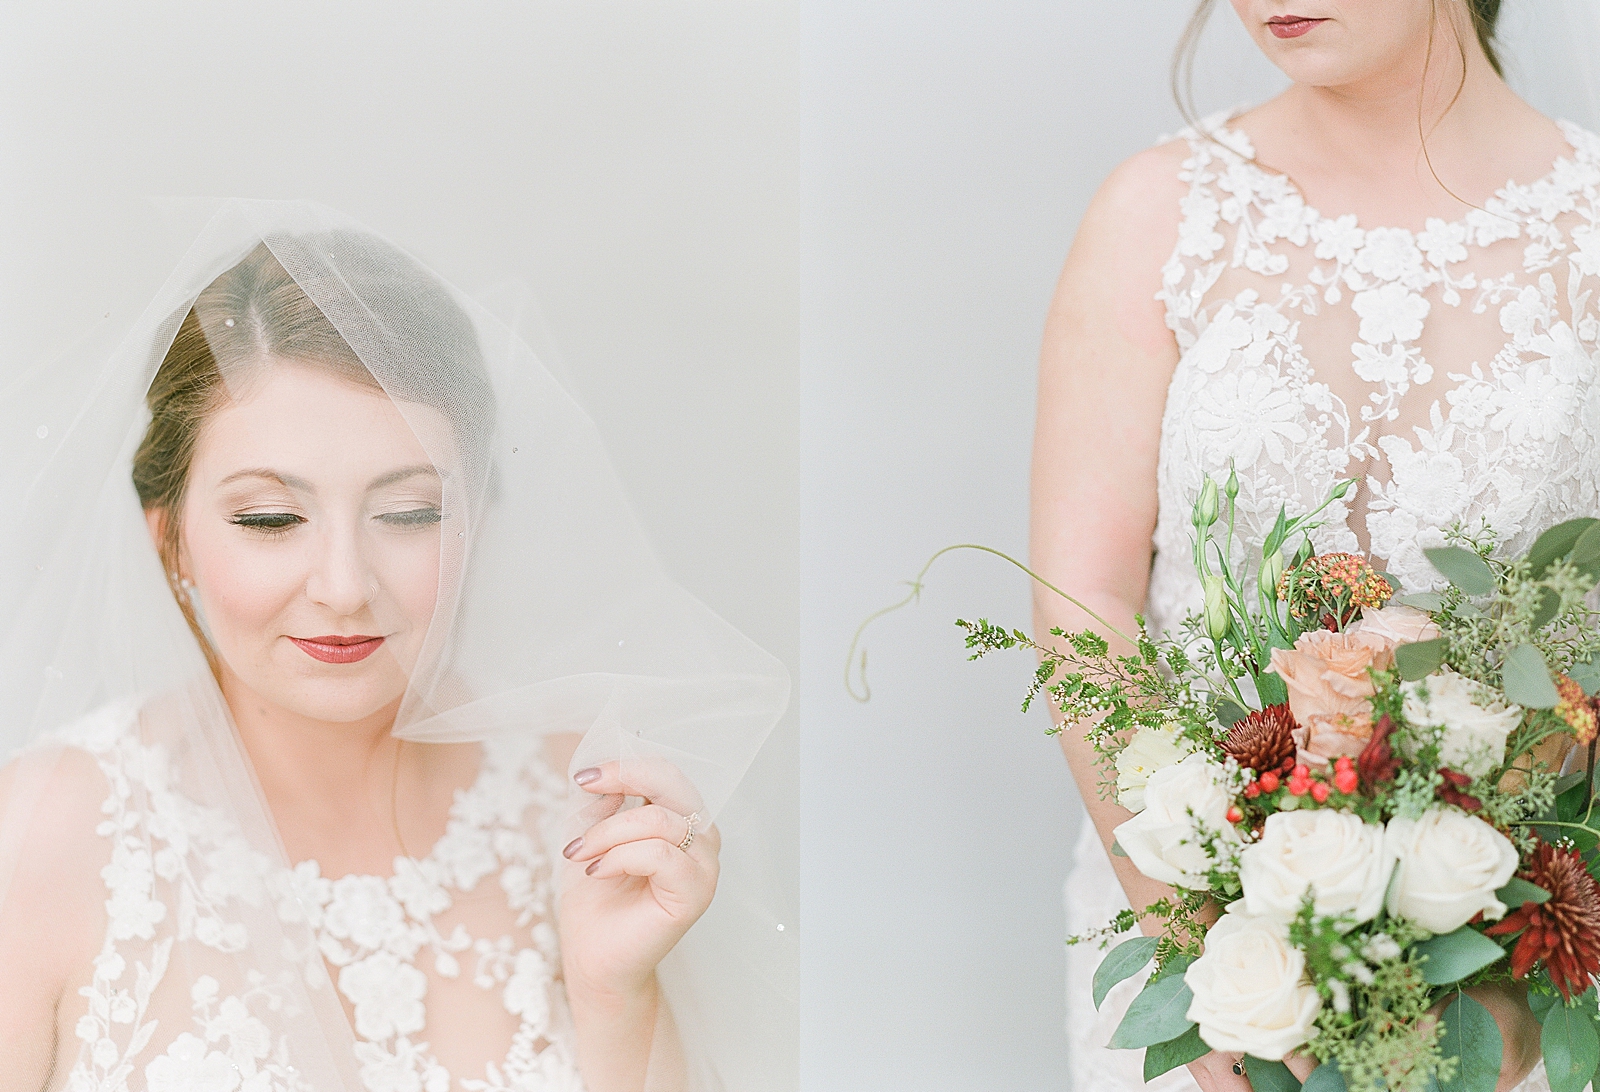 Asheville Bridal Editorial Bride with Veil and Detail of Brides Bouquet Photos